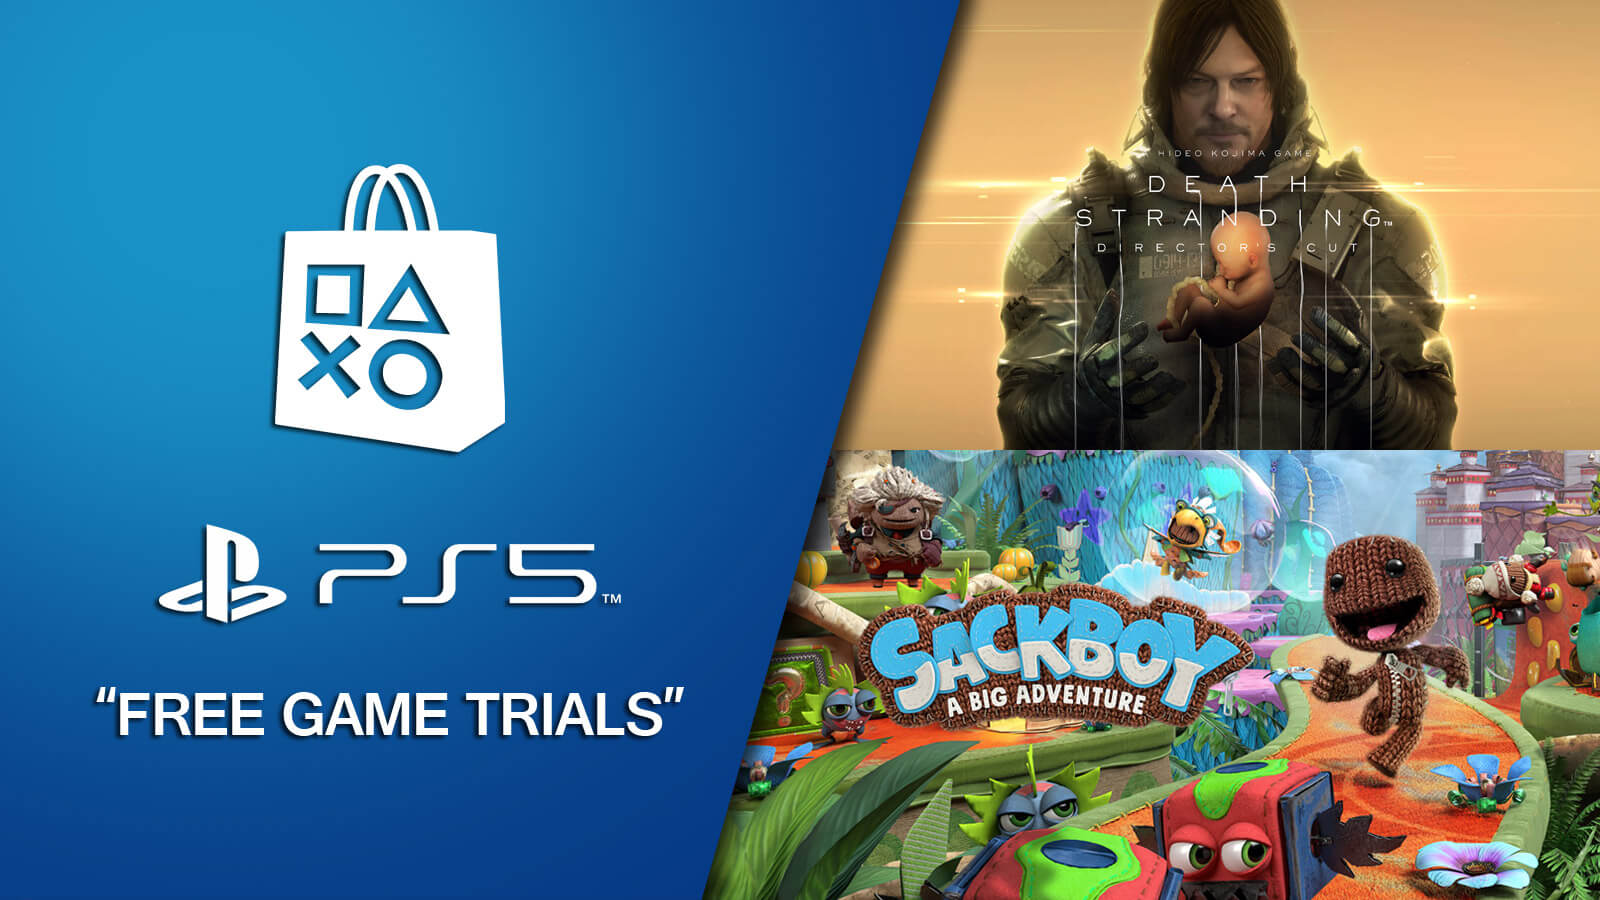 Sony has introduced free game trials to PlayStation 5